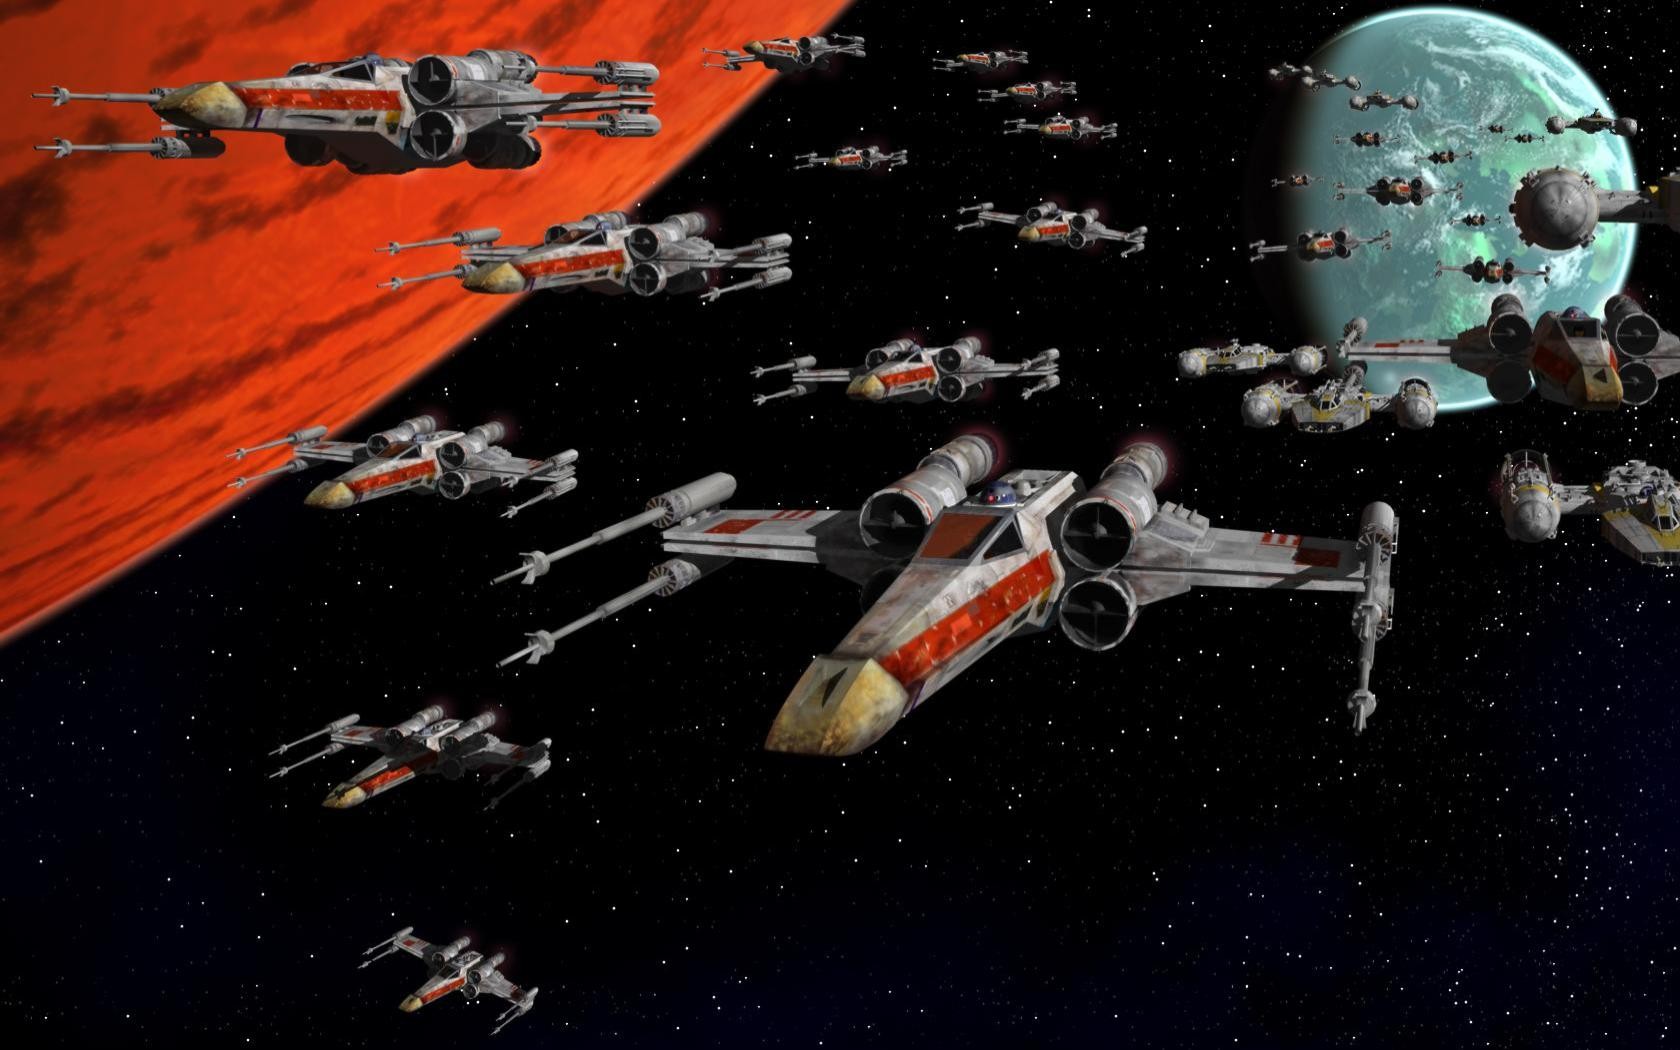 General 1680x1050 Star Wars Rebel Alliance Star Wars Ships science fiction movies Star Wars: Episode IV - A New Hope movie scenes X-wing